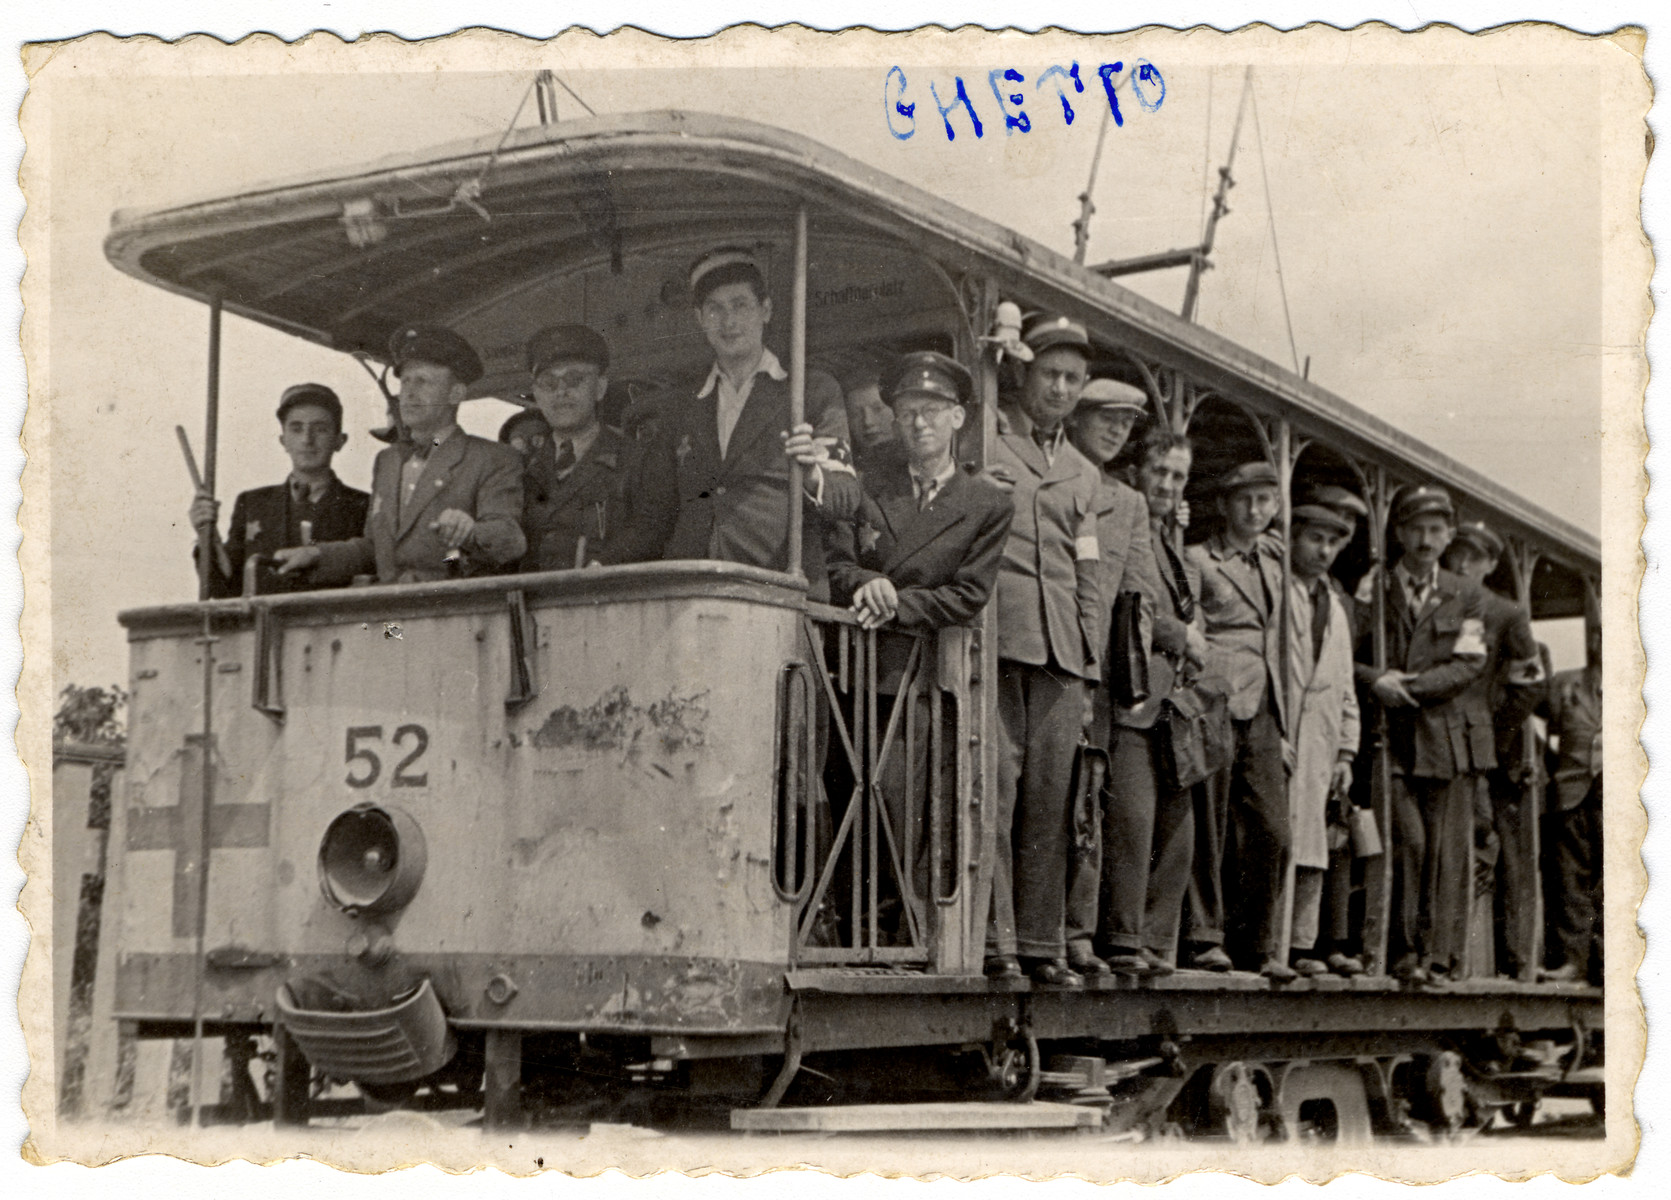 Group portrait of Jewish policemen posing on a streetcar of the Lodz ghetto.  The driver of the streetcar is Rozenbaum.